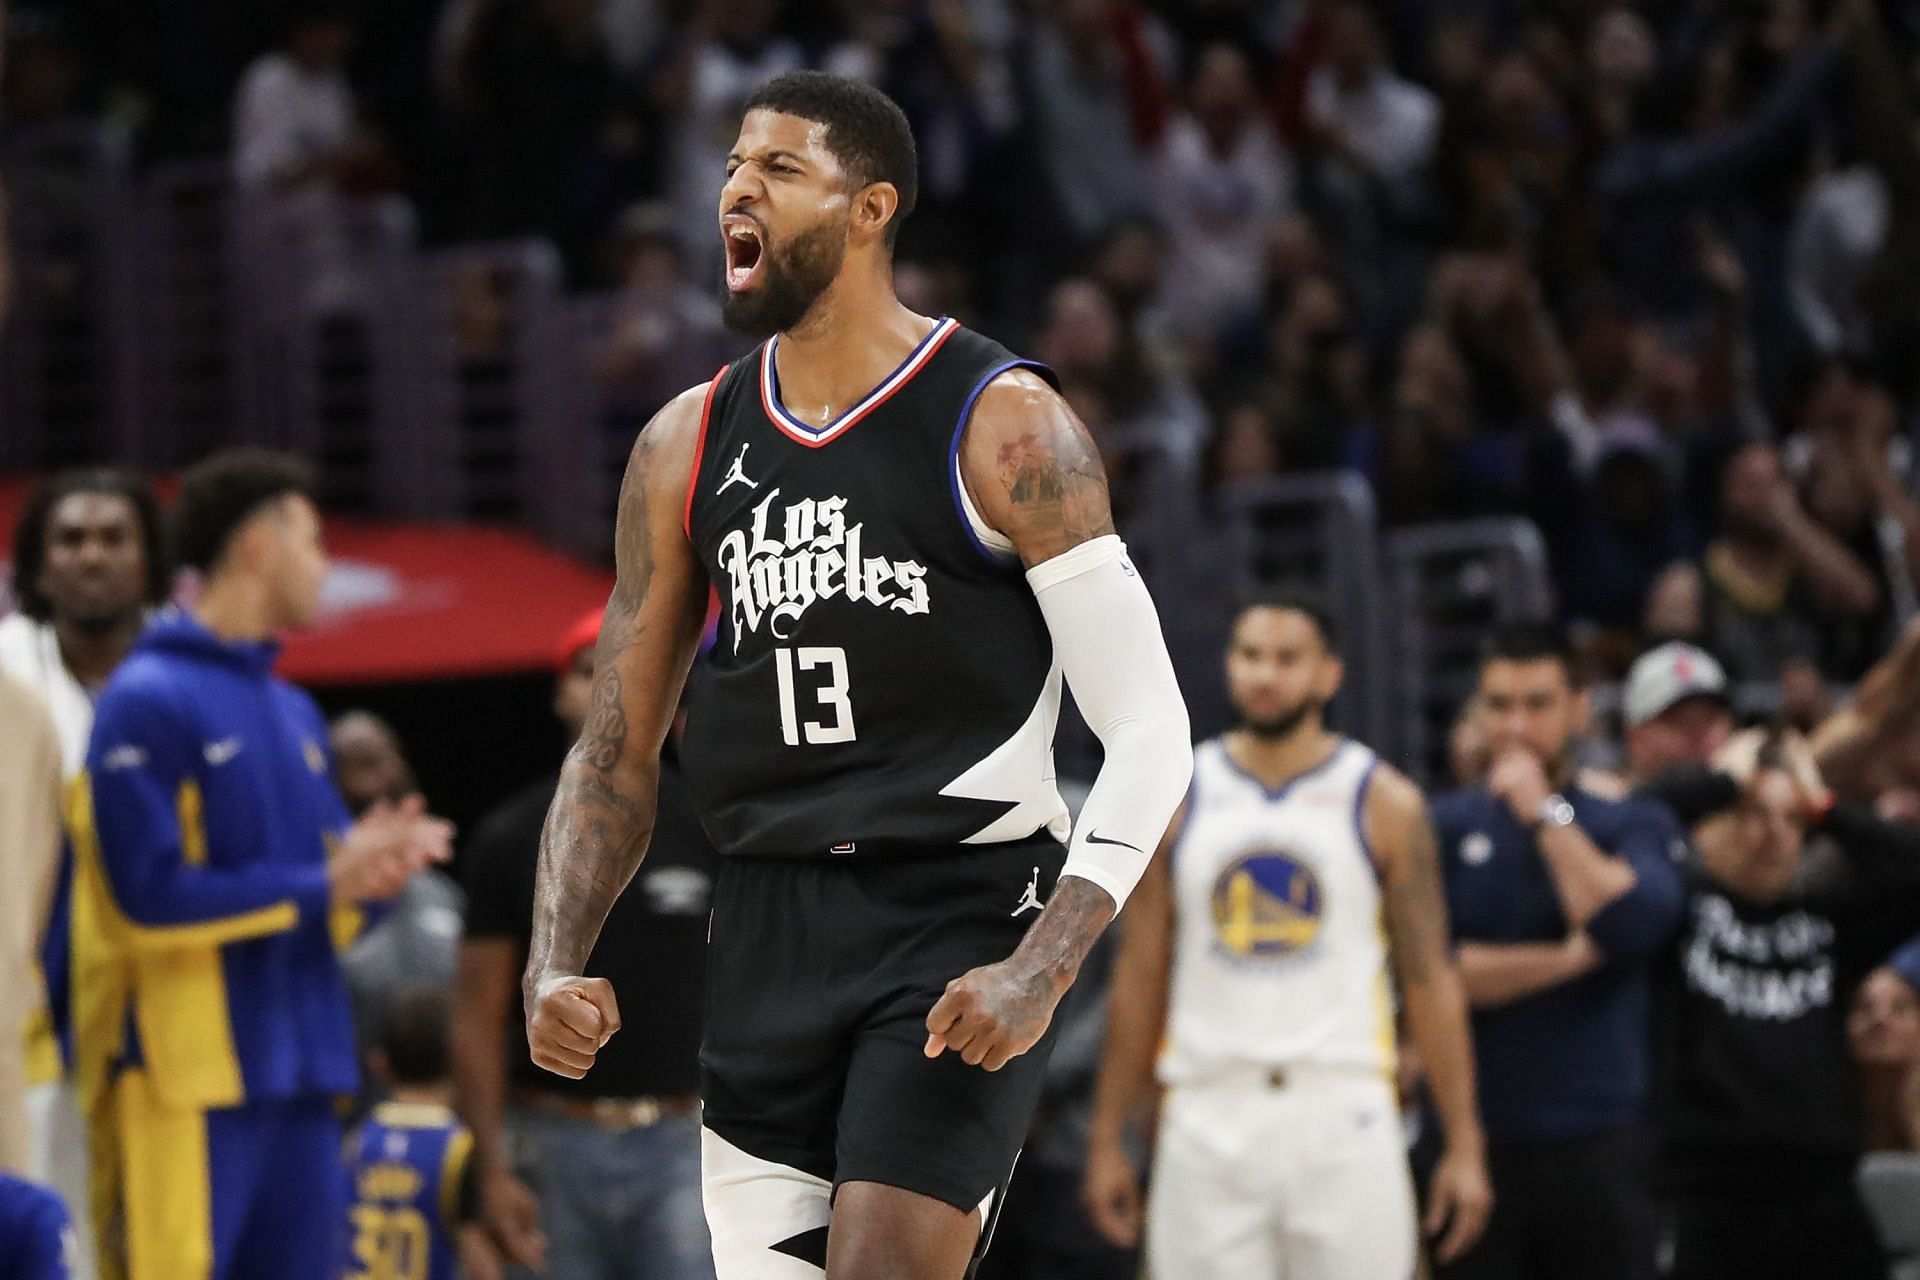 What happened to Paul George?